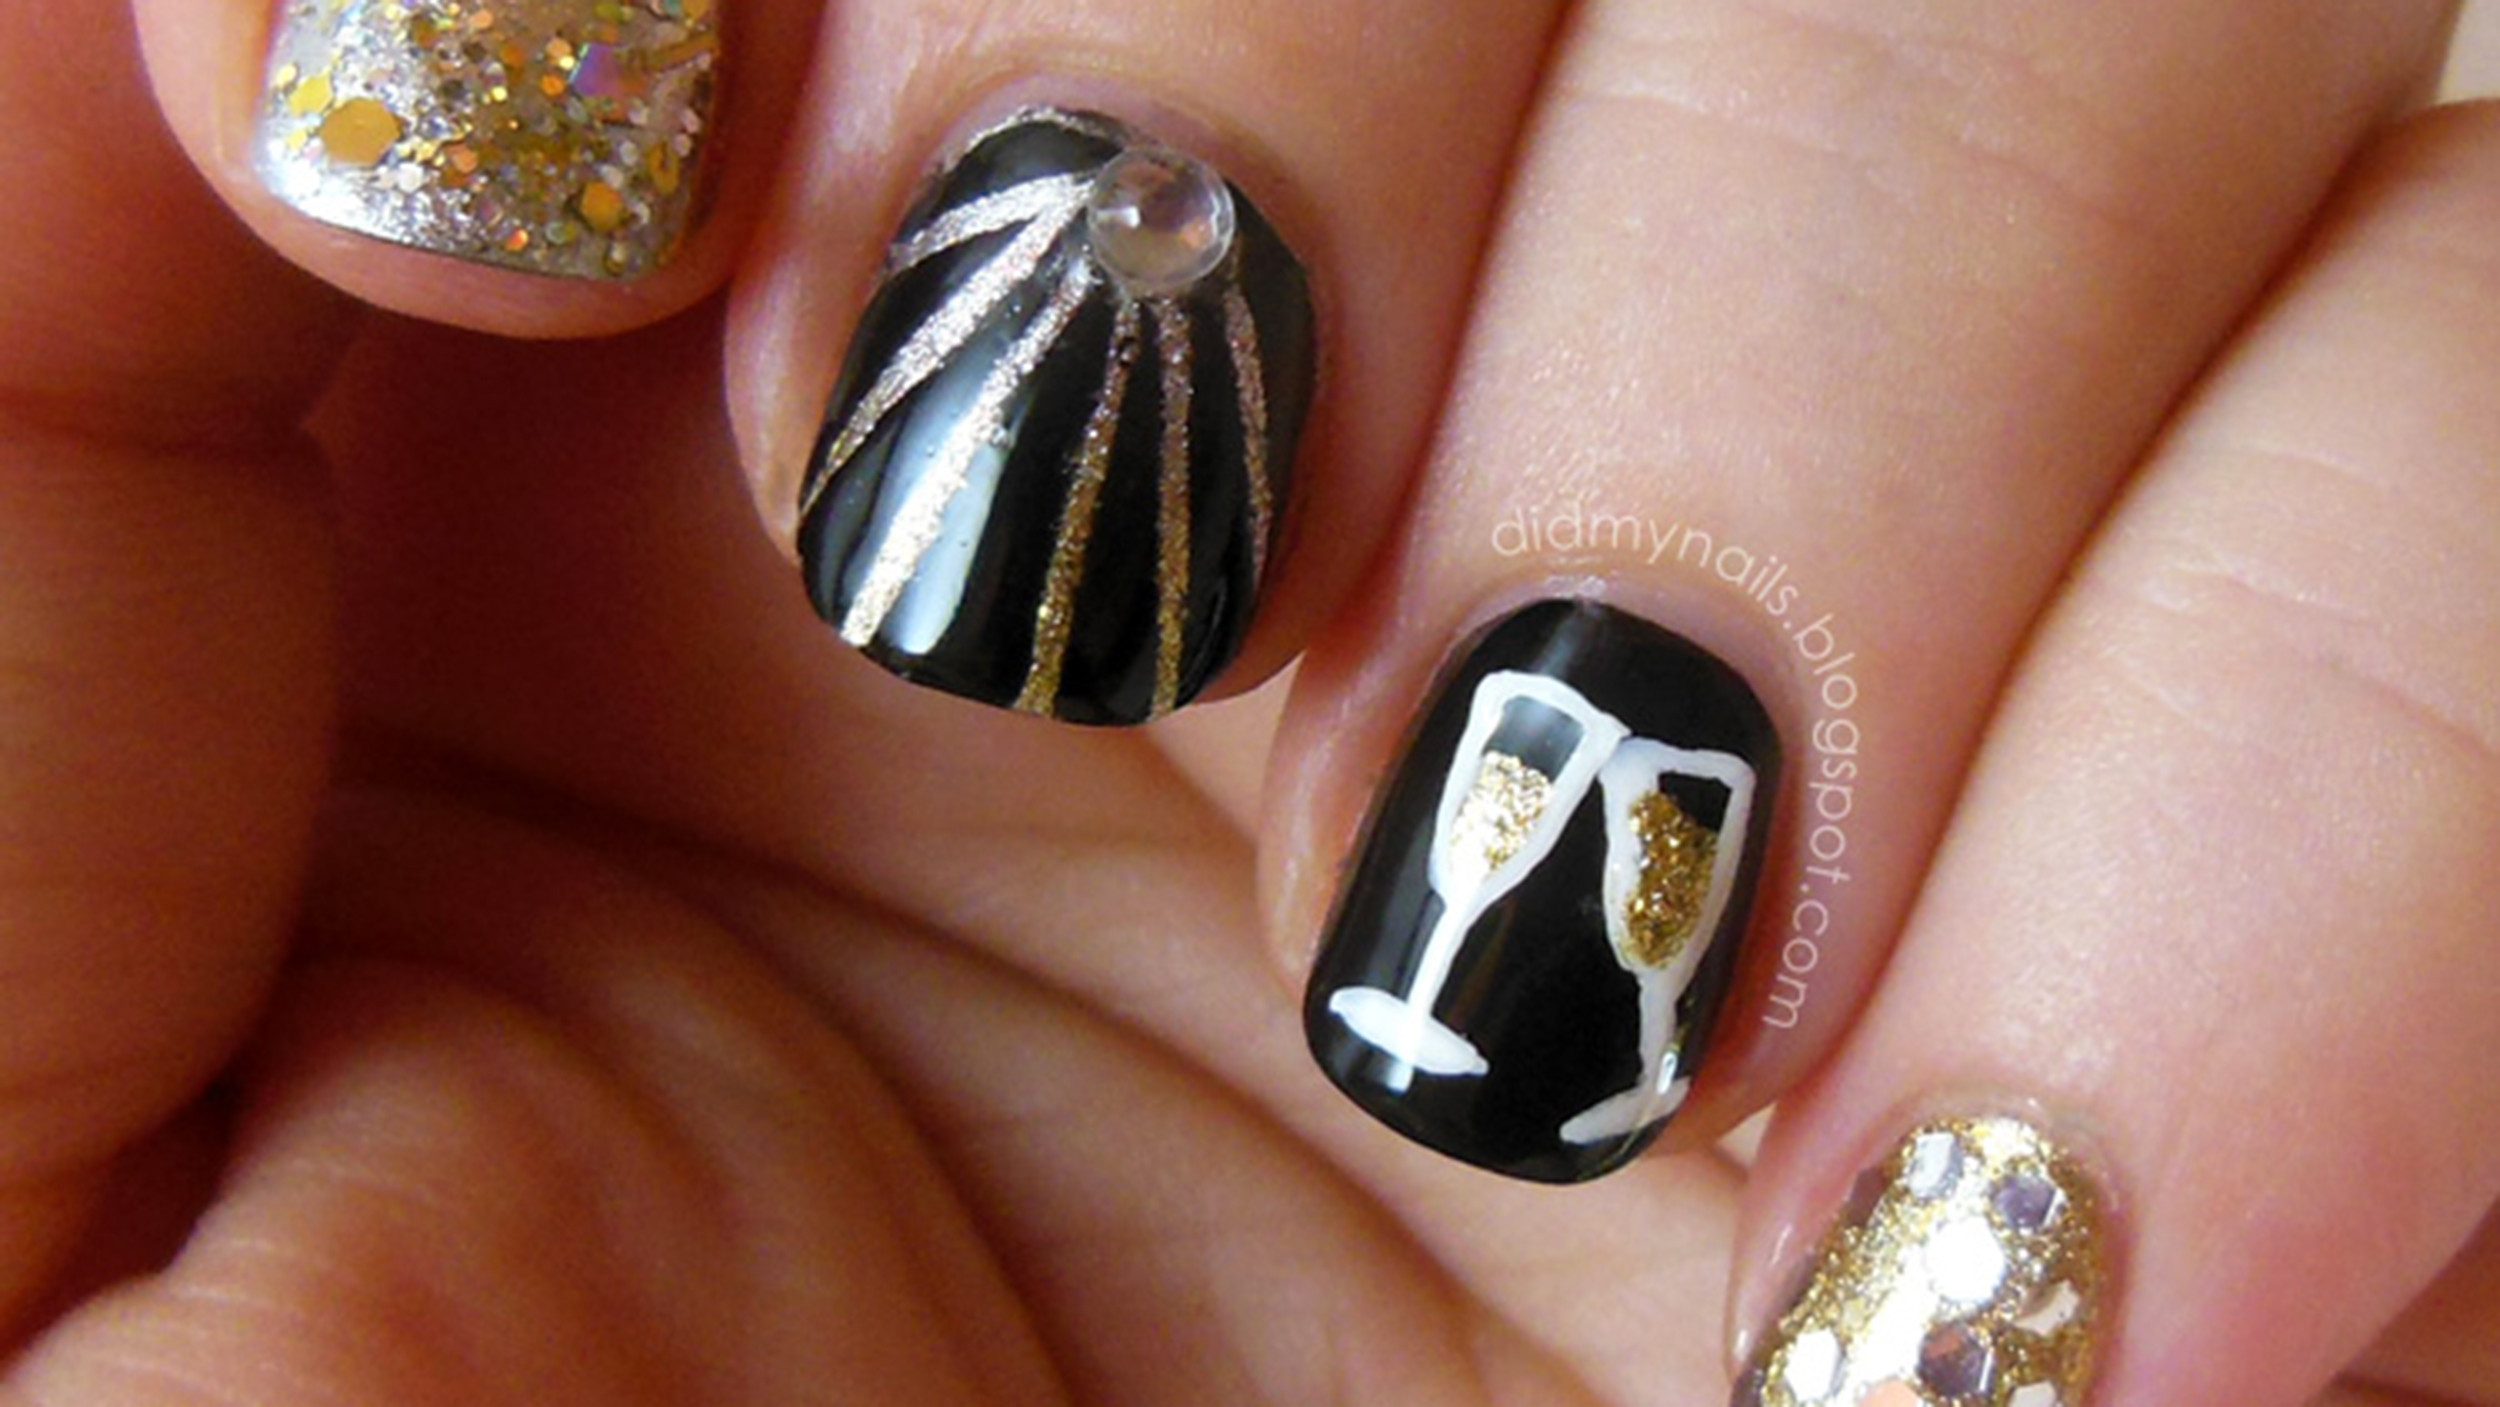 Nail Designs For New Years
 New Year s Eve nail art ideas as pretty as your party